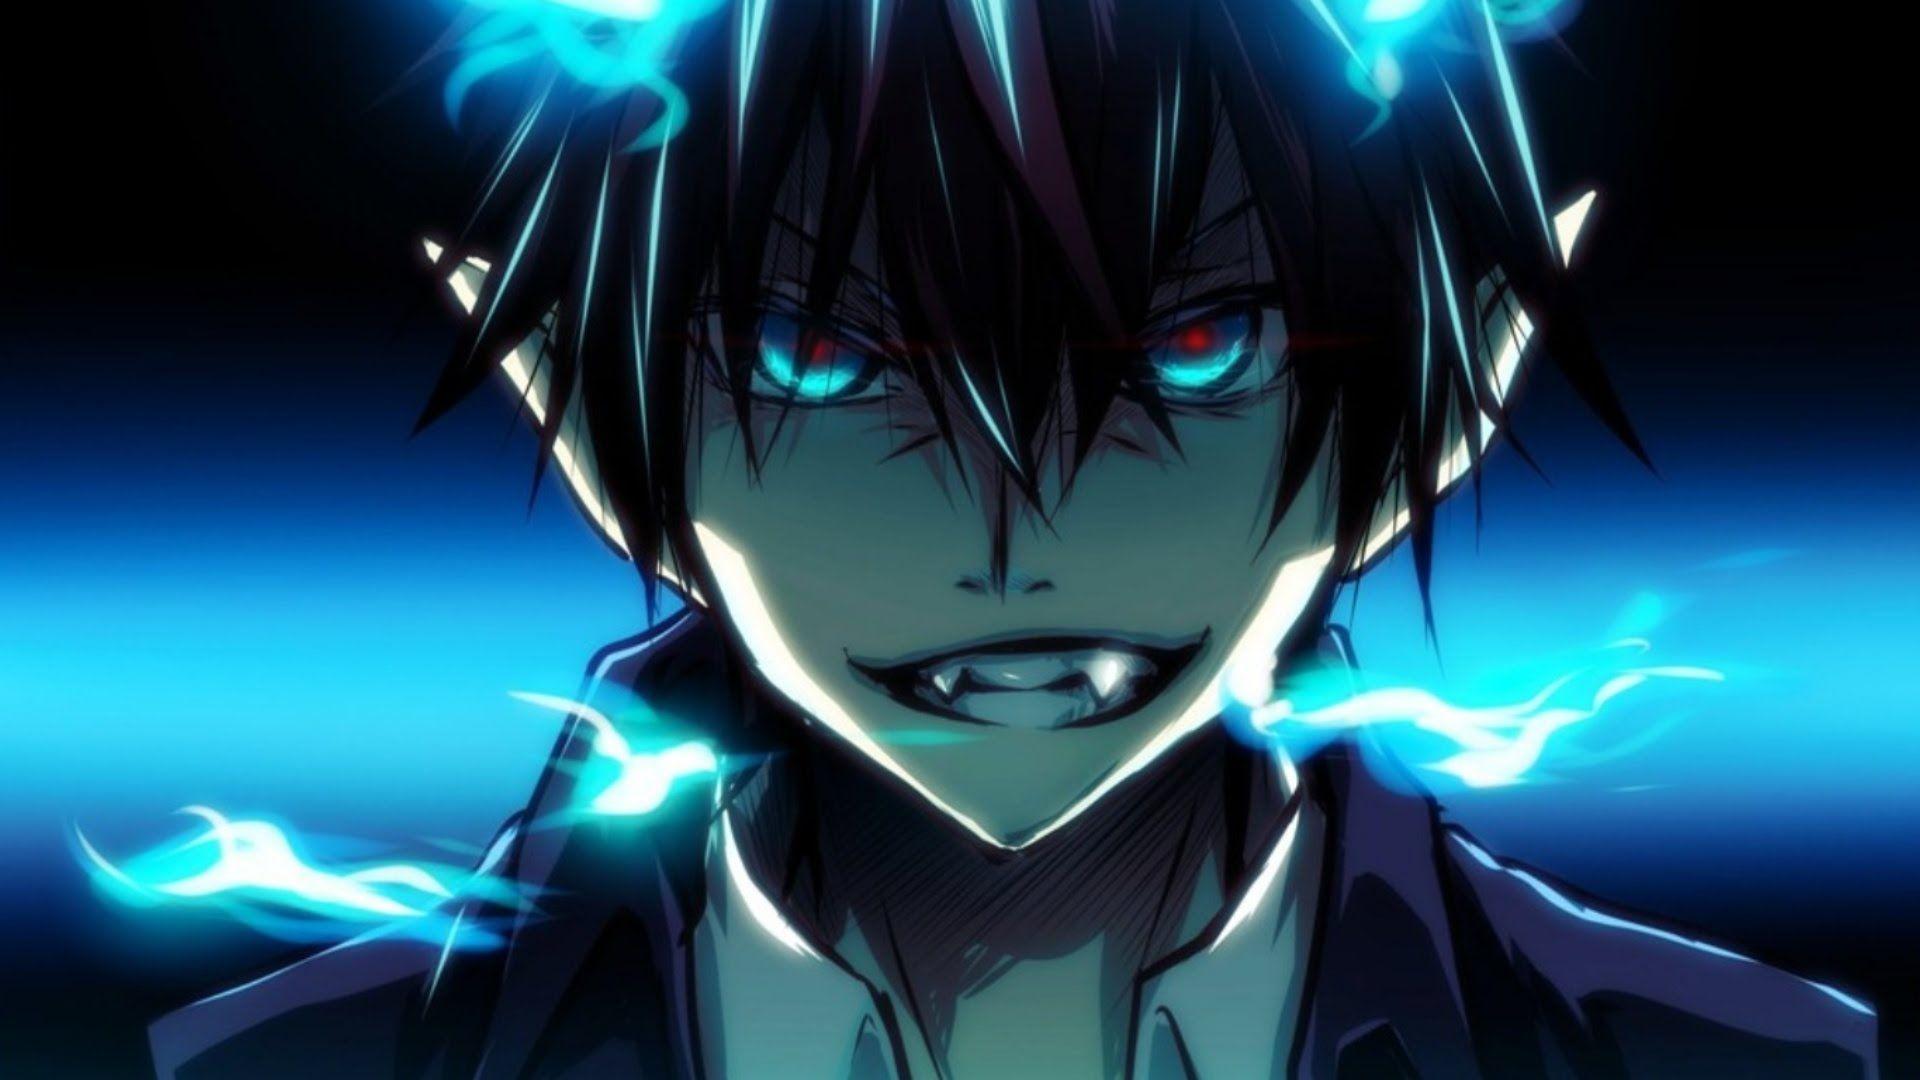 1. "Blue Exorcist" - wide 1